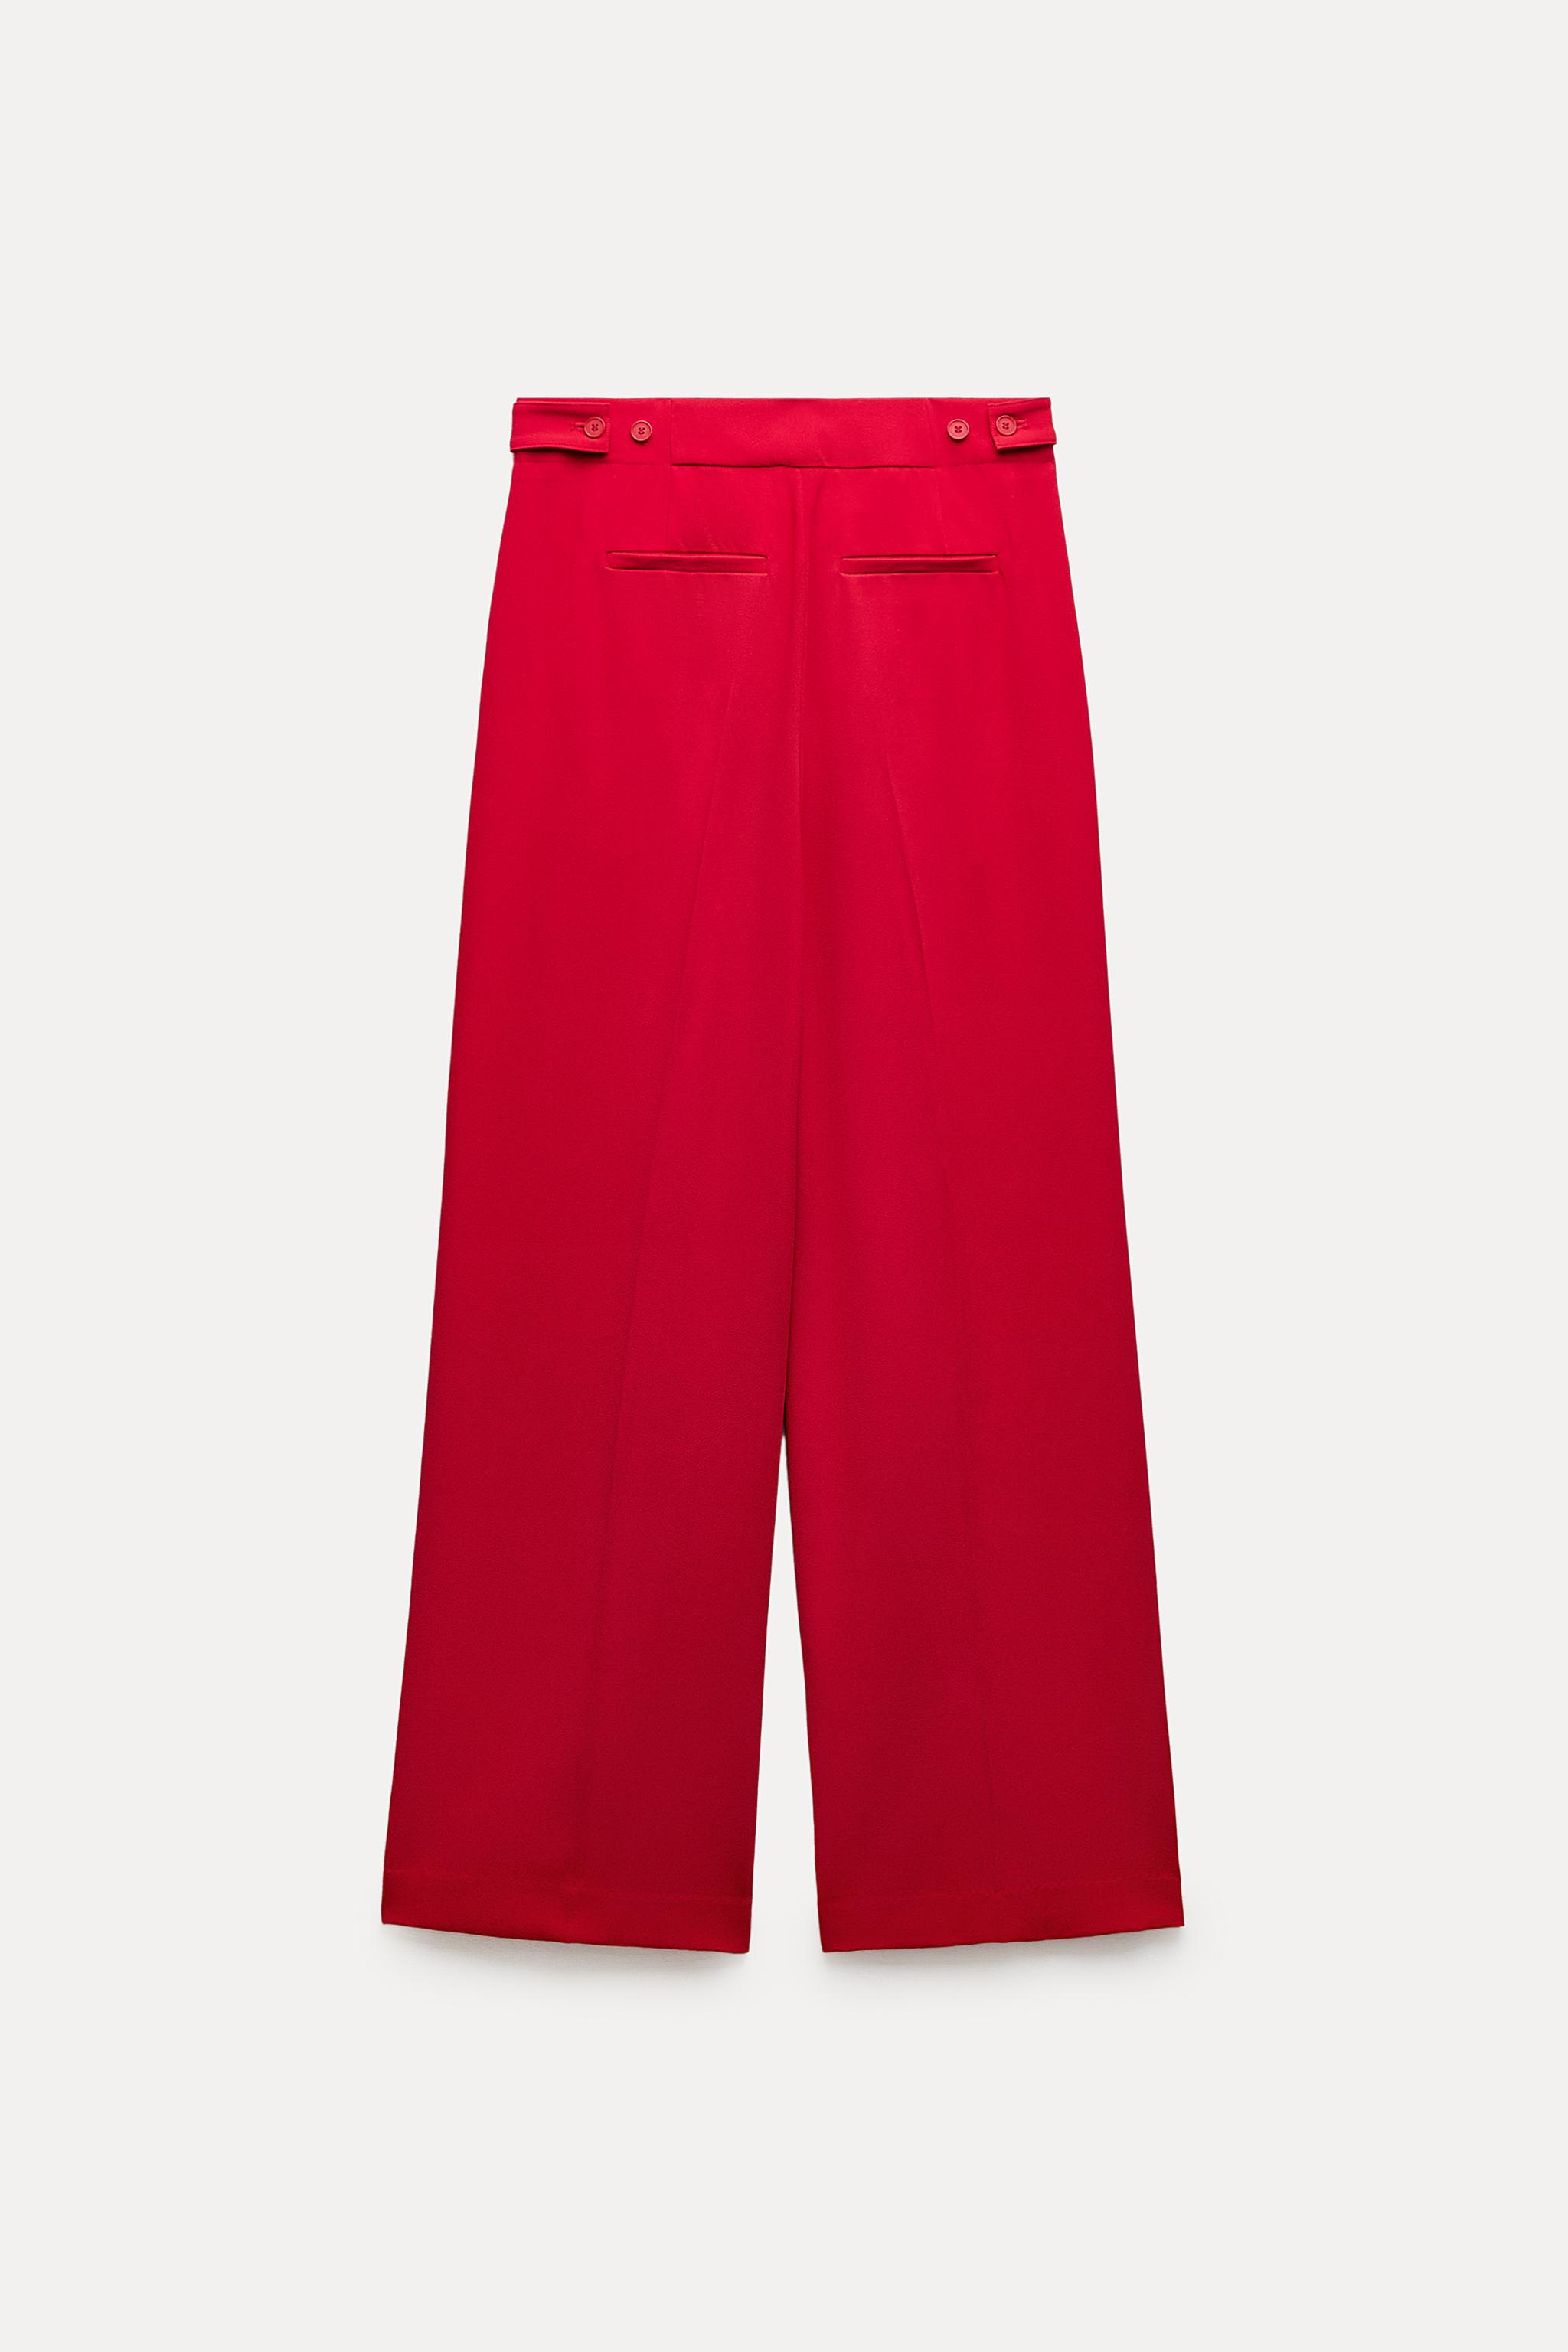 PLEATED TABBED MENSWEAR STYLE PANTS ZW COLLECTION - Bright red 